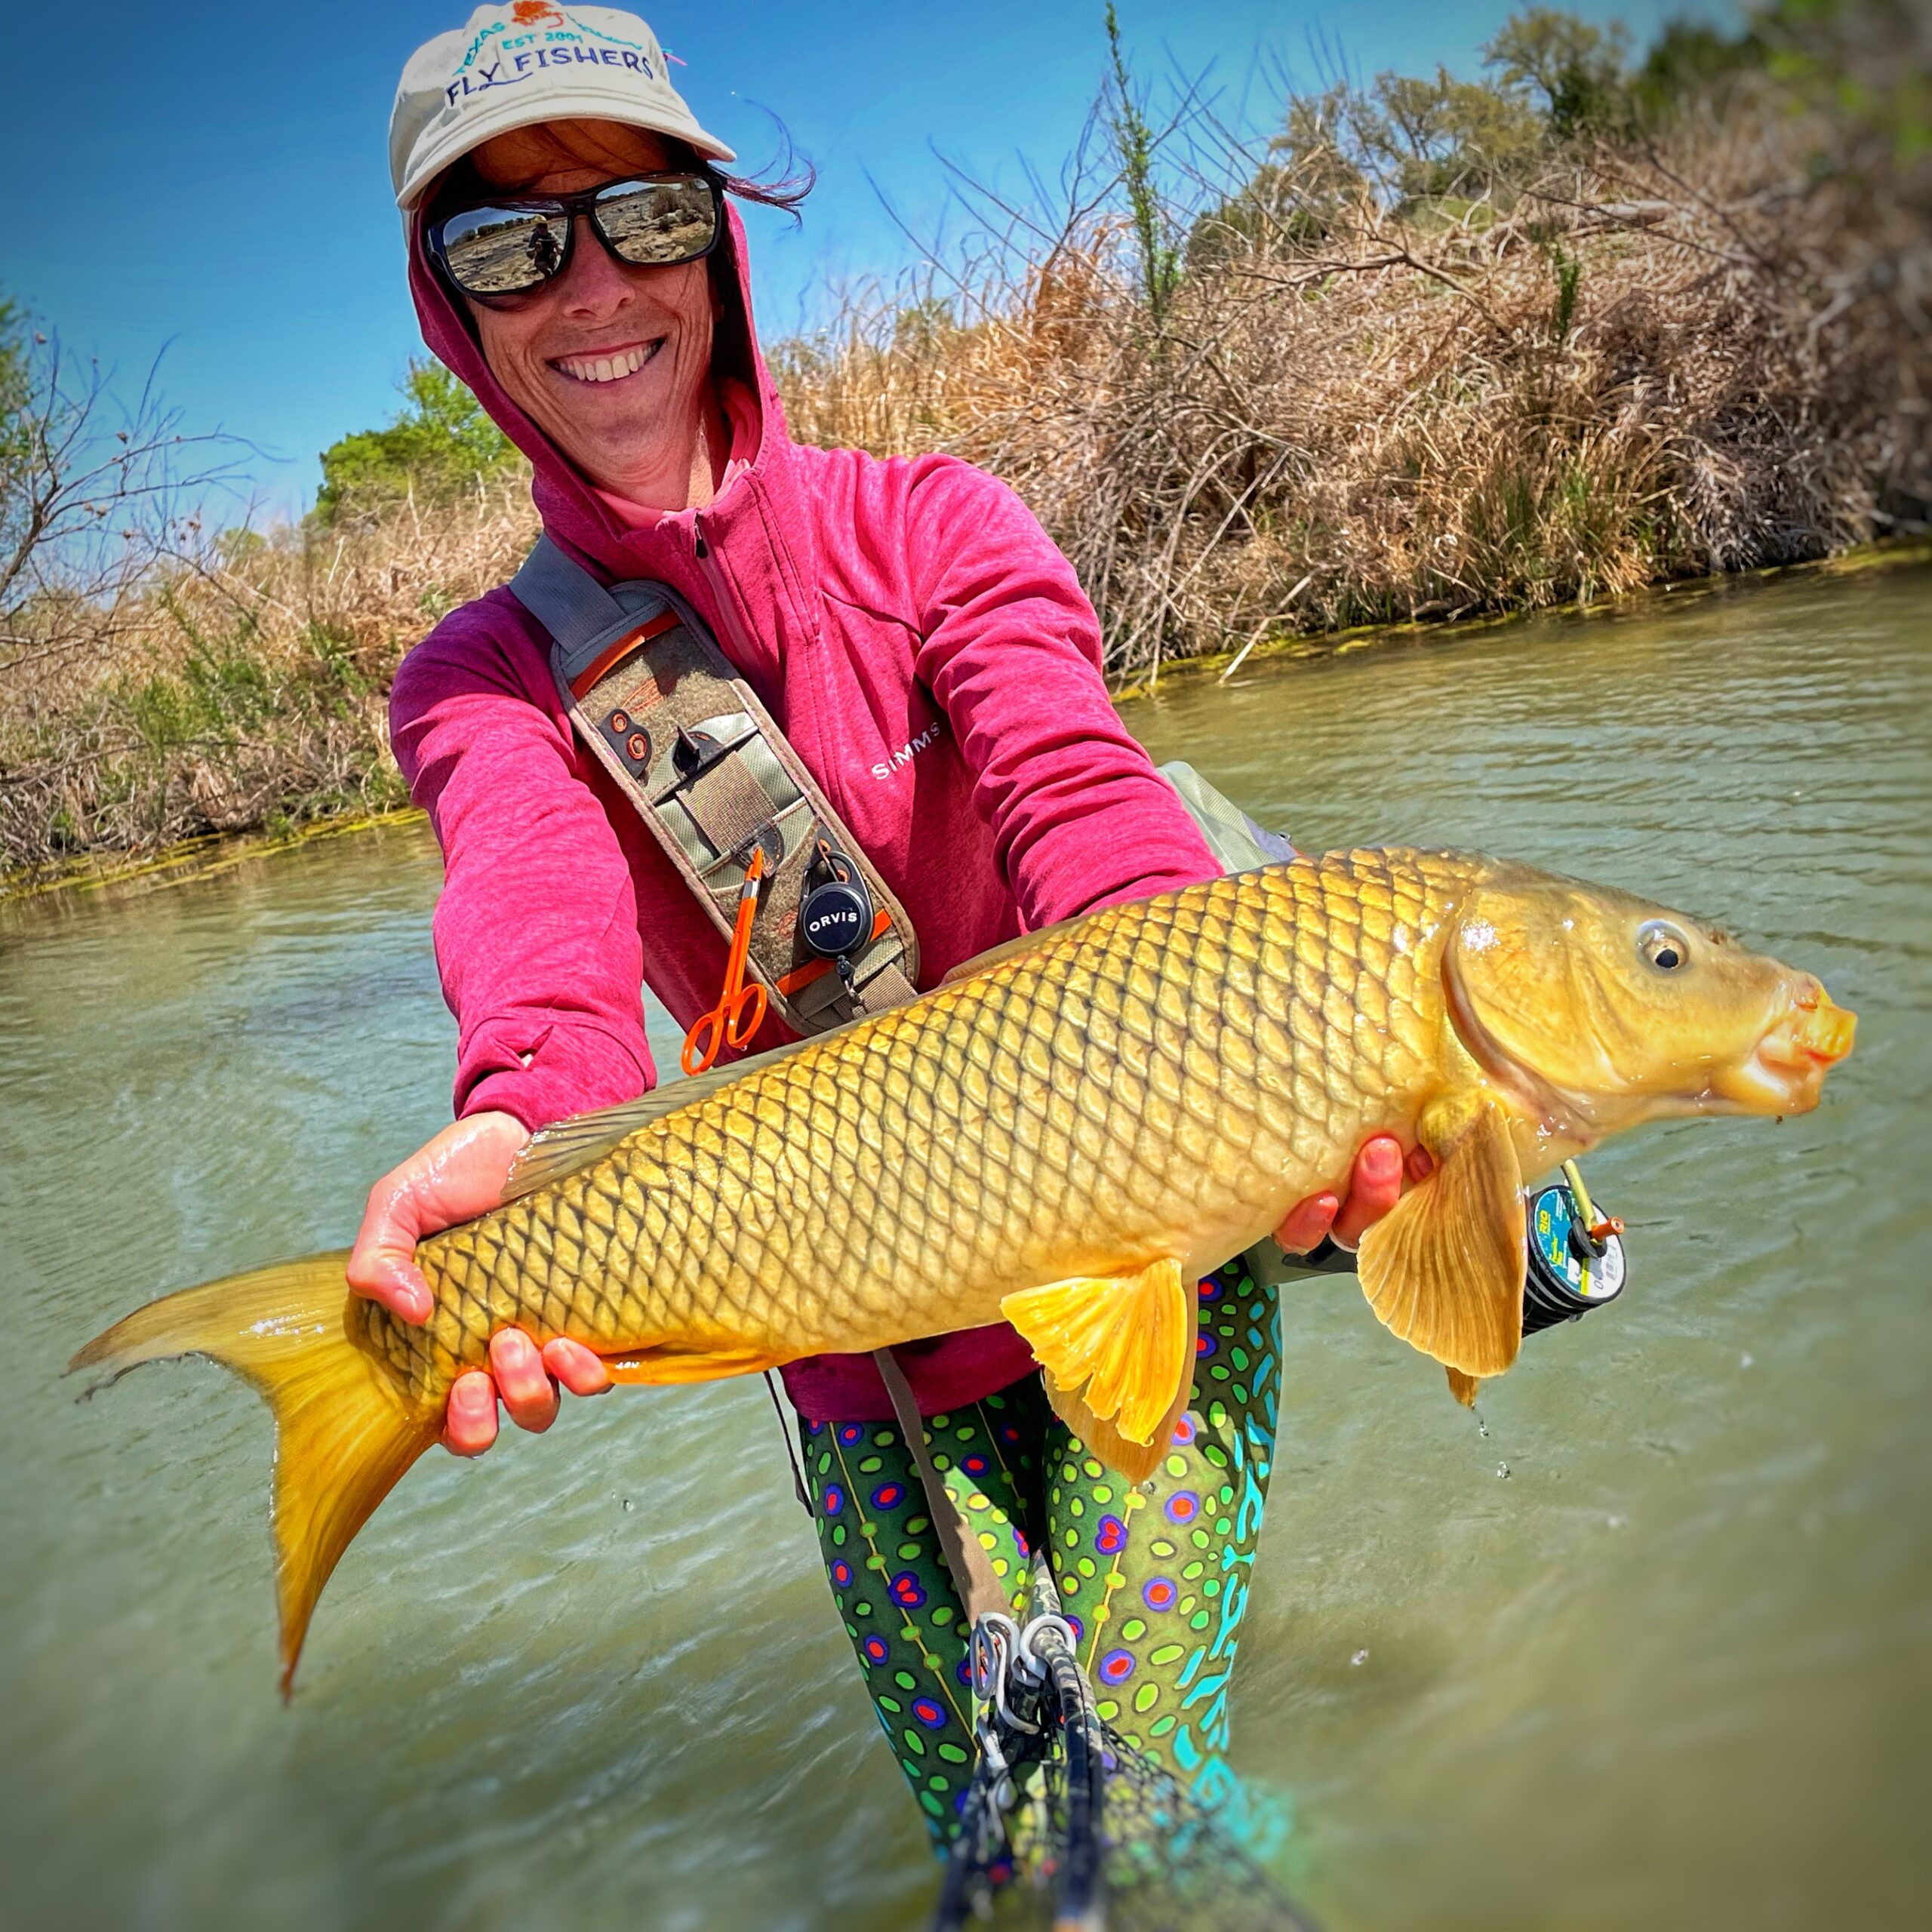 Fly fishing float trips West Fork of the White River near Carmel, Fishers,  Noblesville, Cicero, Perkinsville, Strawtown, and Anderson withIndiana Fly  Fishing Guides